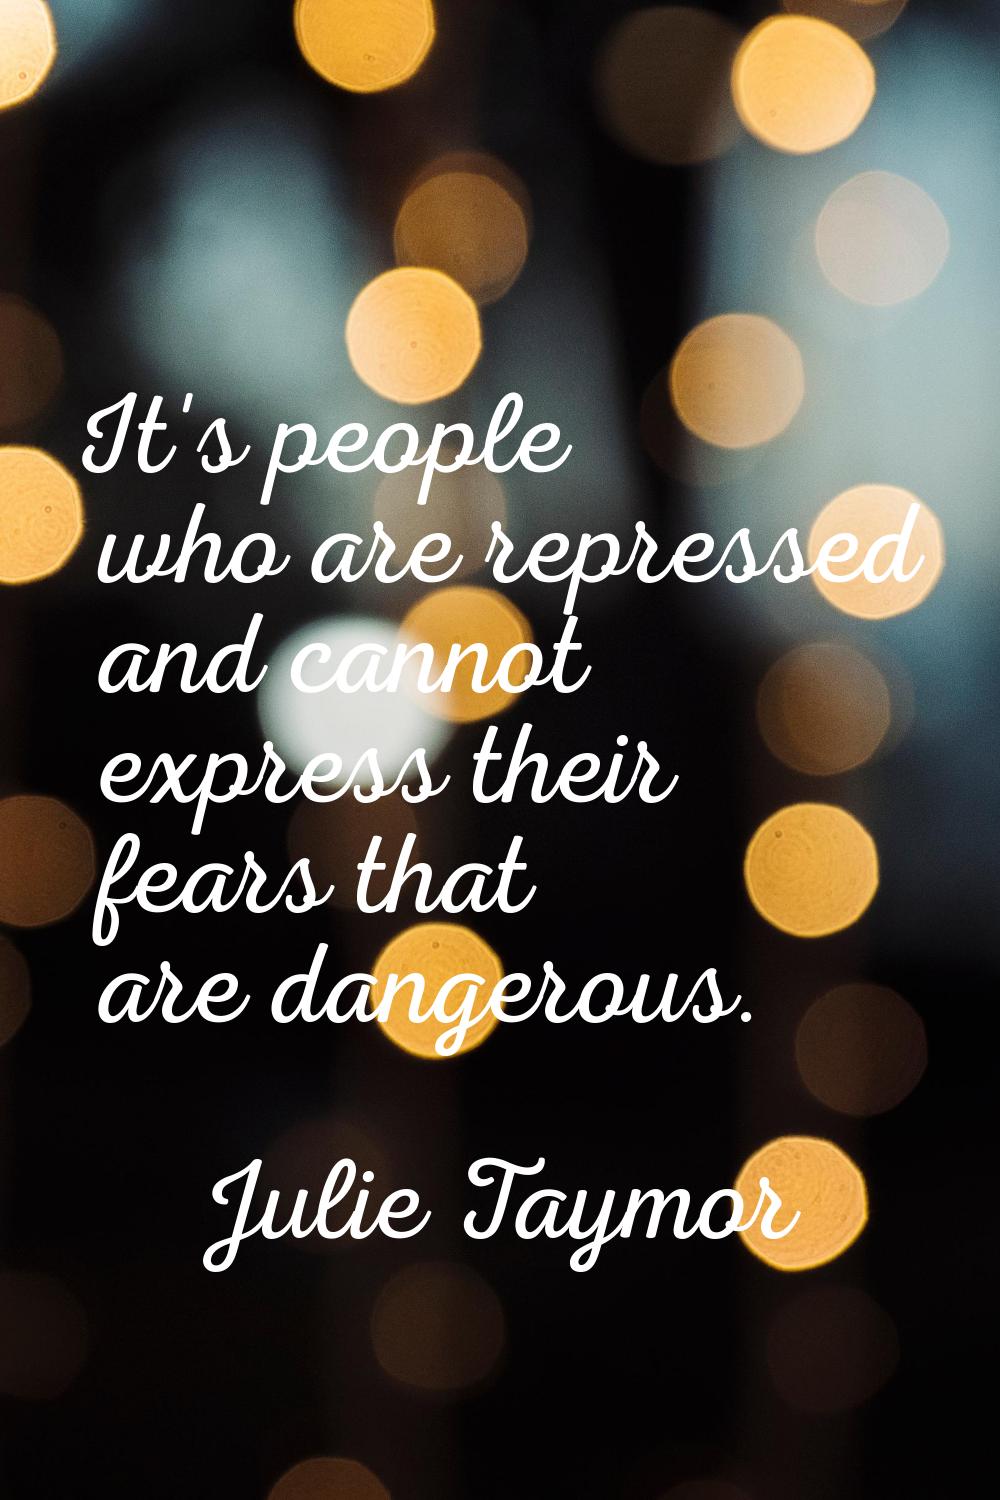 It's people who are repressed and cannot express their fears that are dangerous.